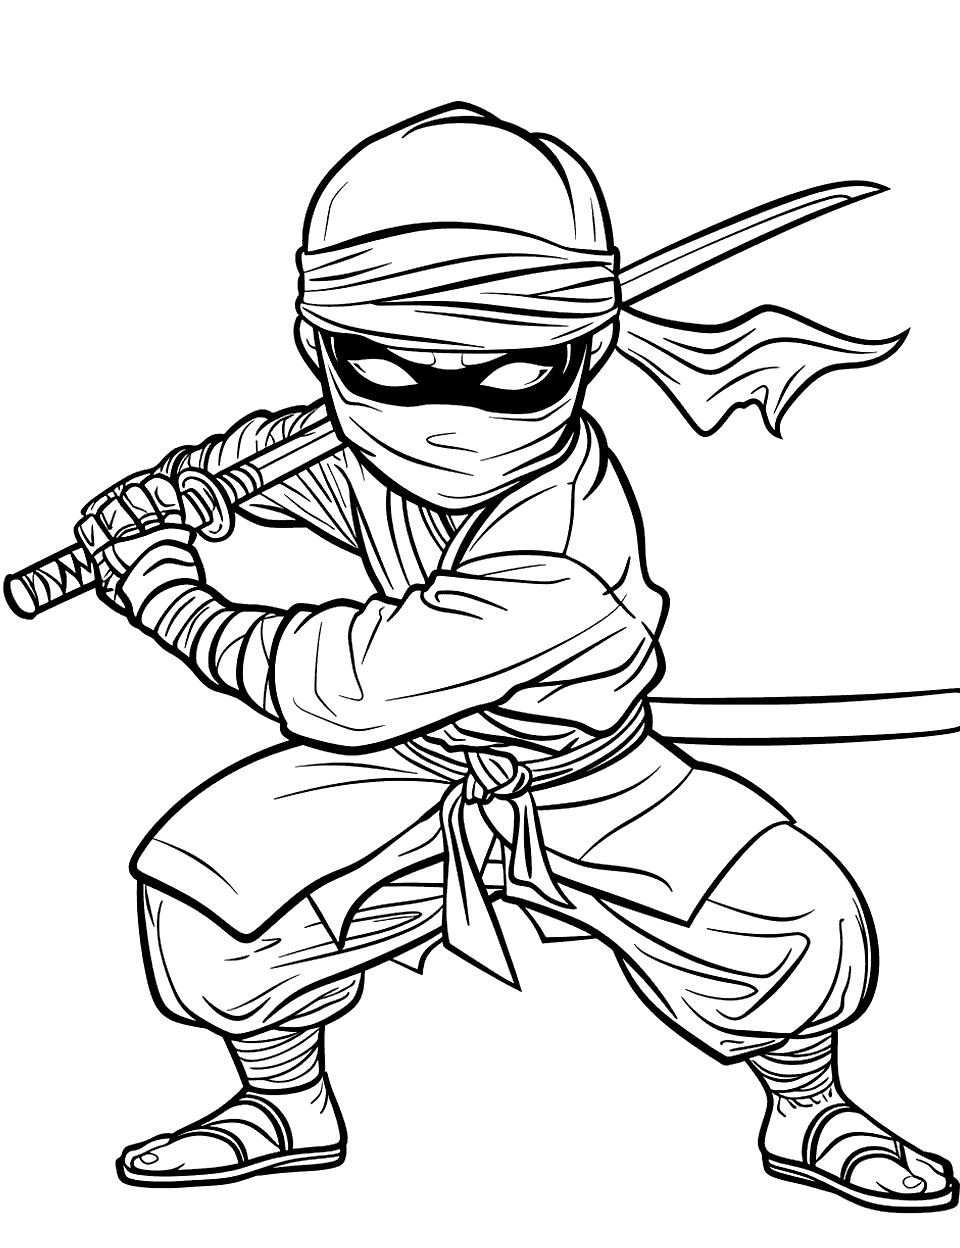 Ninja Warrior in Action Coloring Page - A ninja warrior with a katana, ready to strike in a dynamic pose.